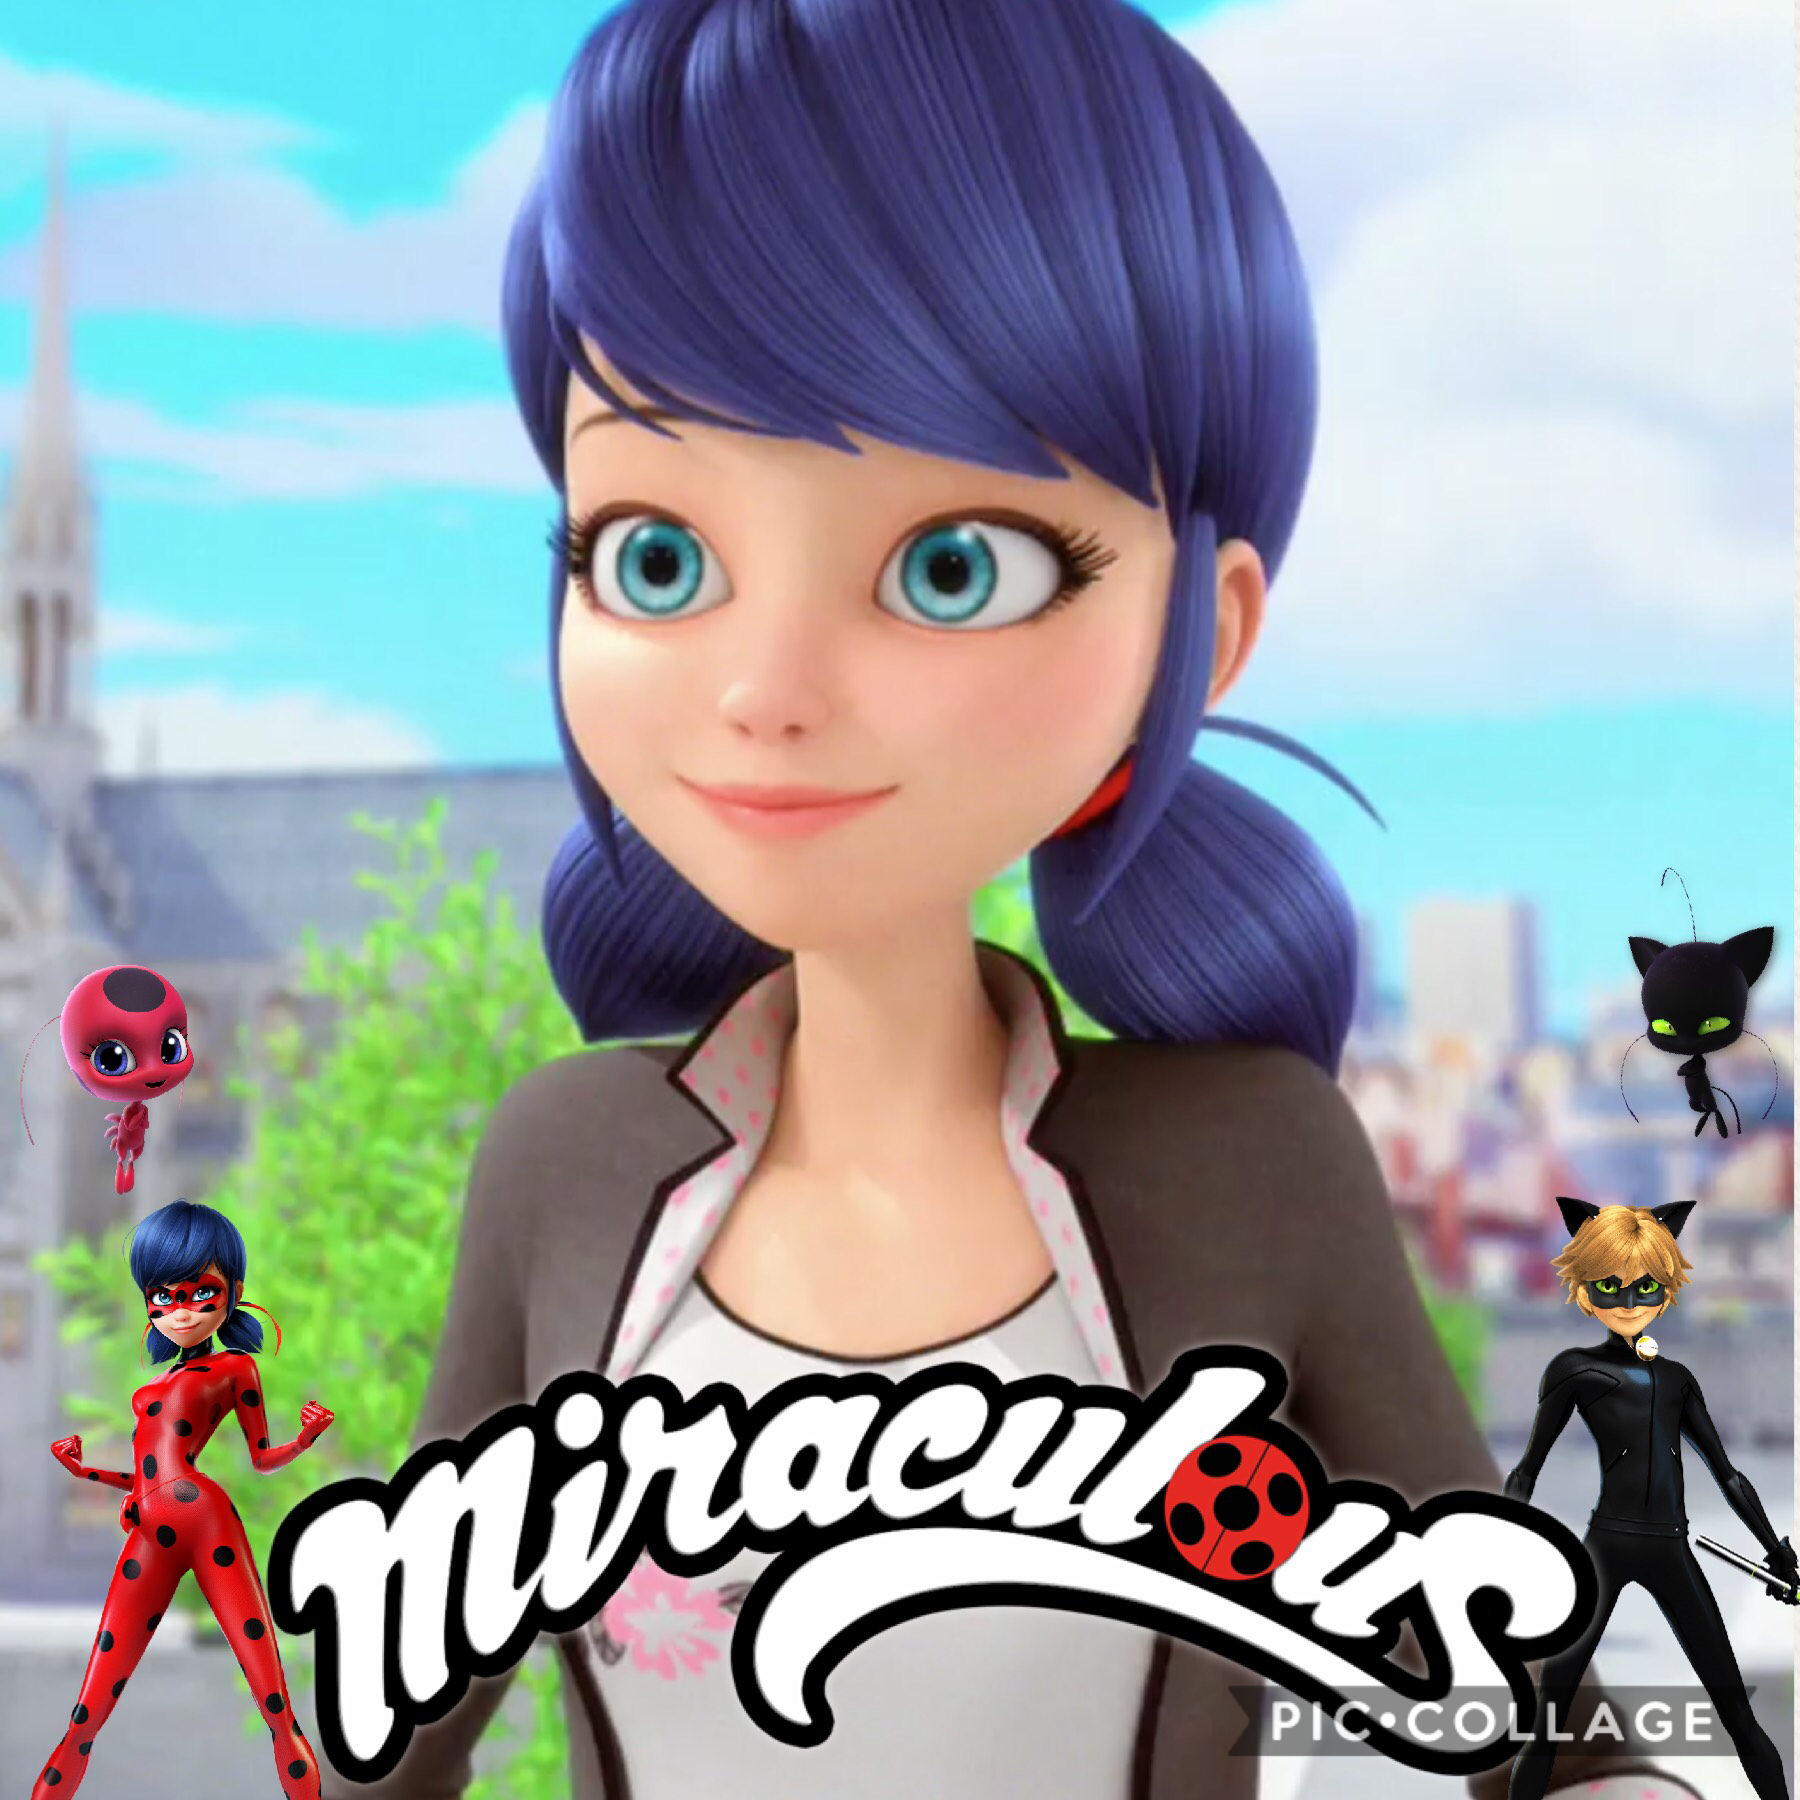 Any other Miraculous Ladybug fans out there?